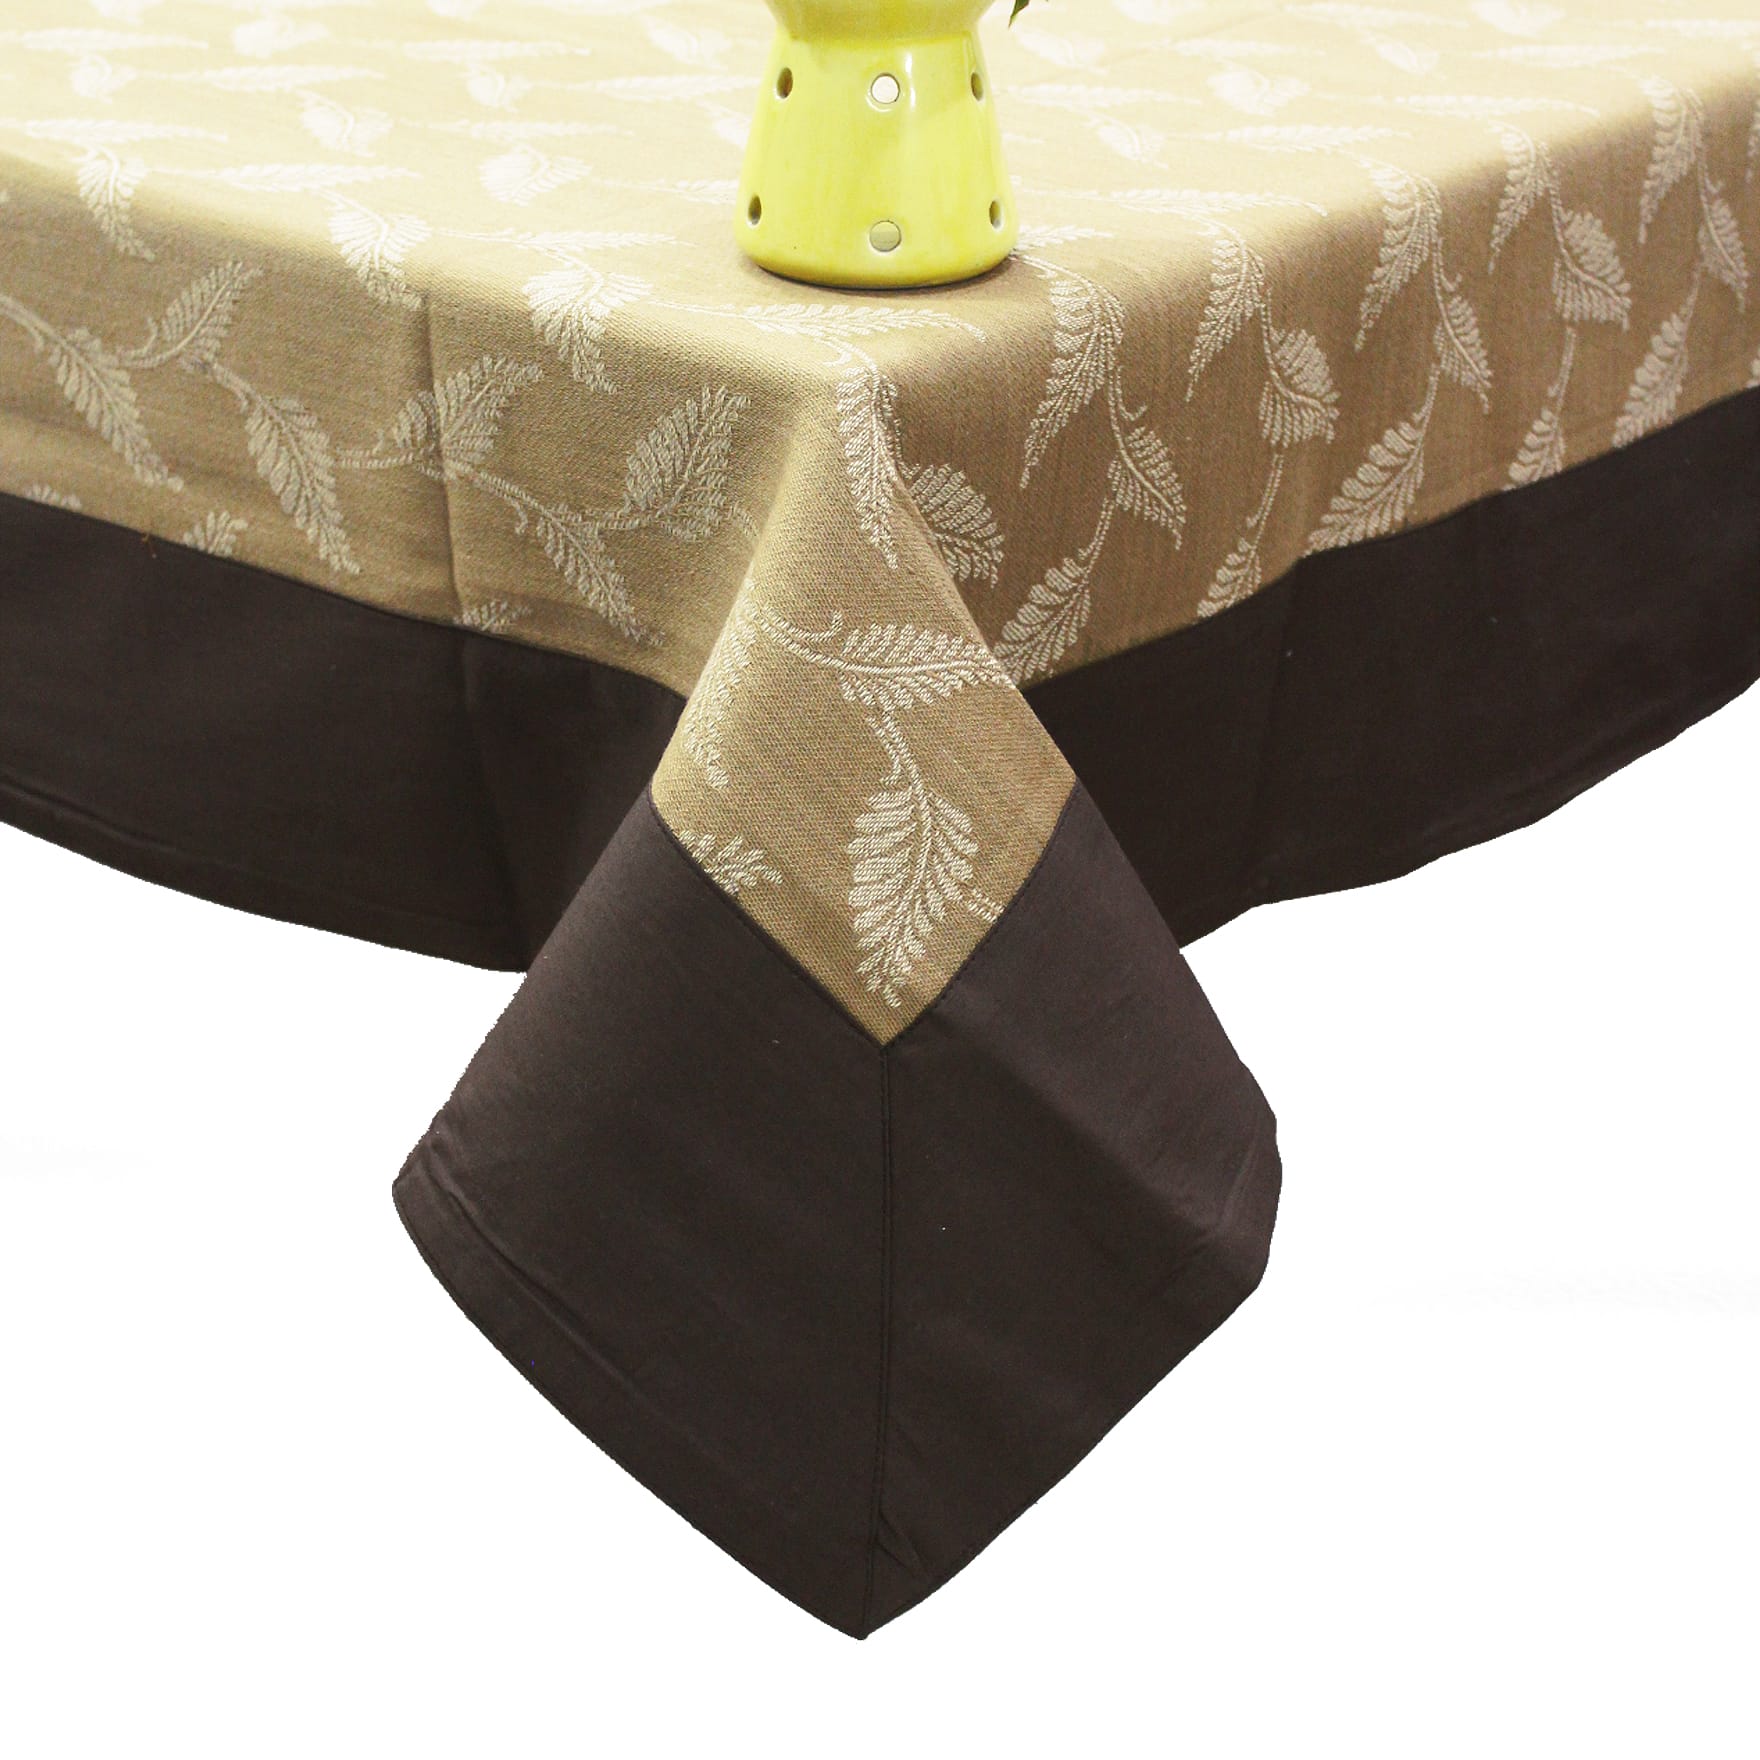 Alpha Brown Woven Cotton Floral Table Cover(1 Pc) online in India